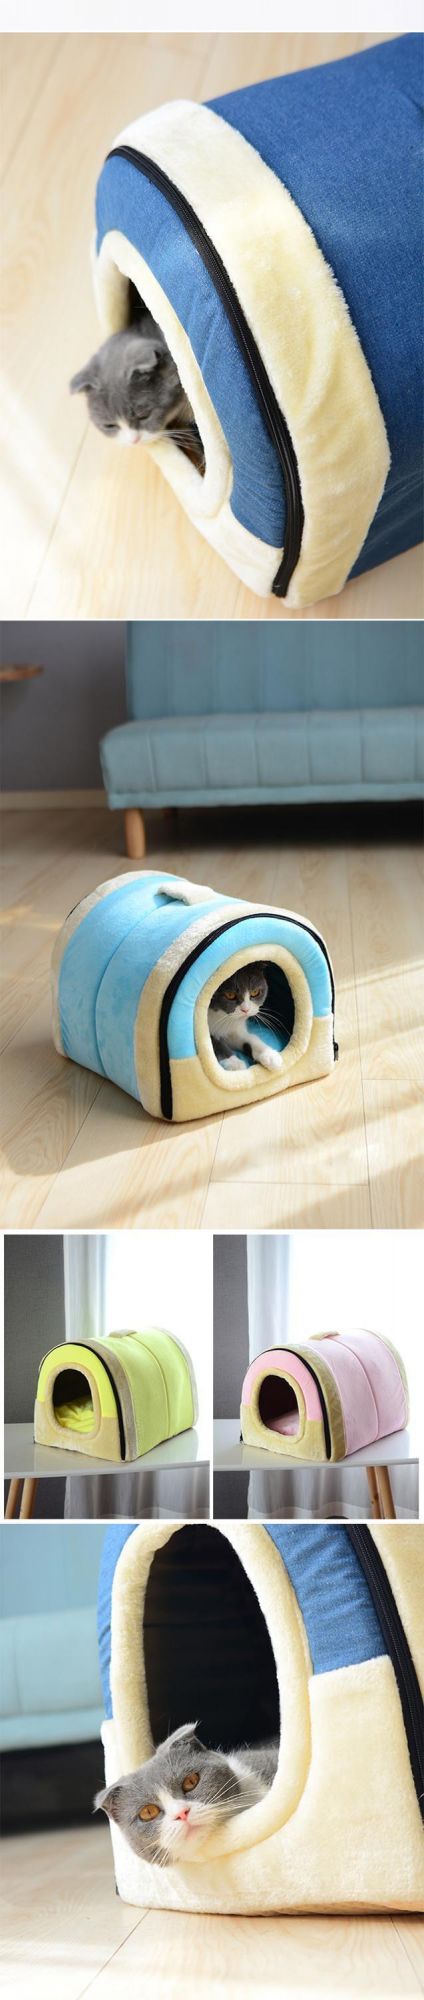 Hot Selling Small Pet Bed Washable Pet Beds Accessories Foldable Four Seasons General Novelty Pet Beds